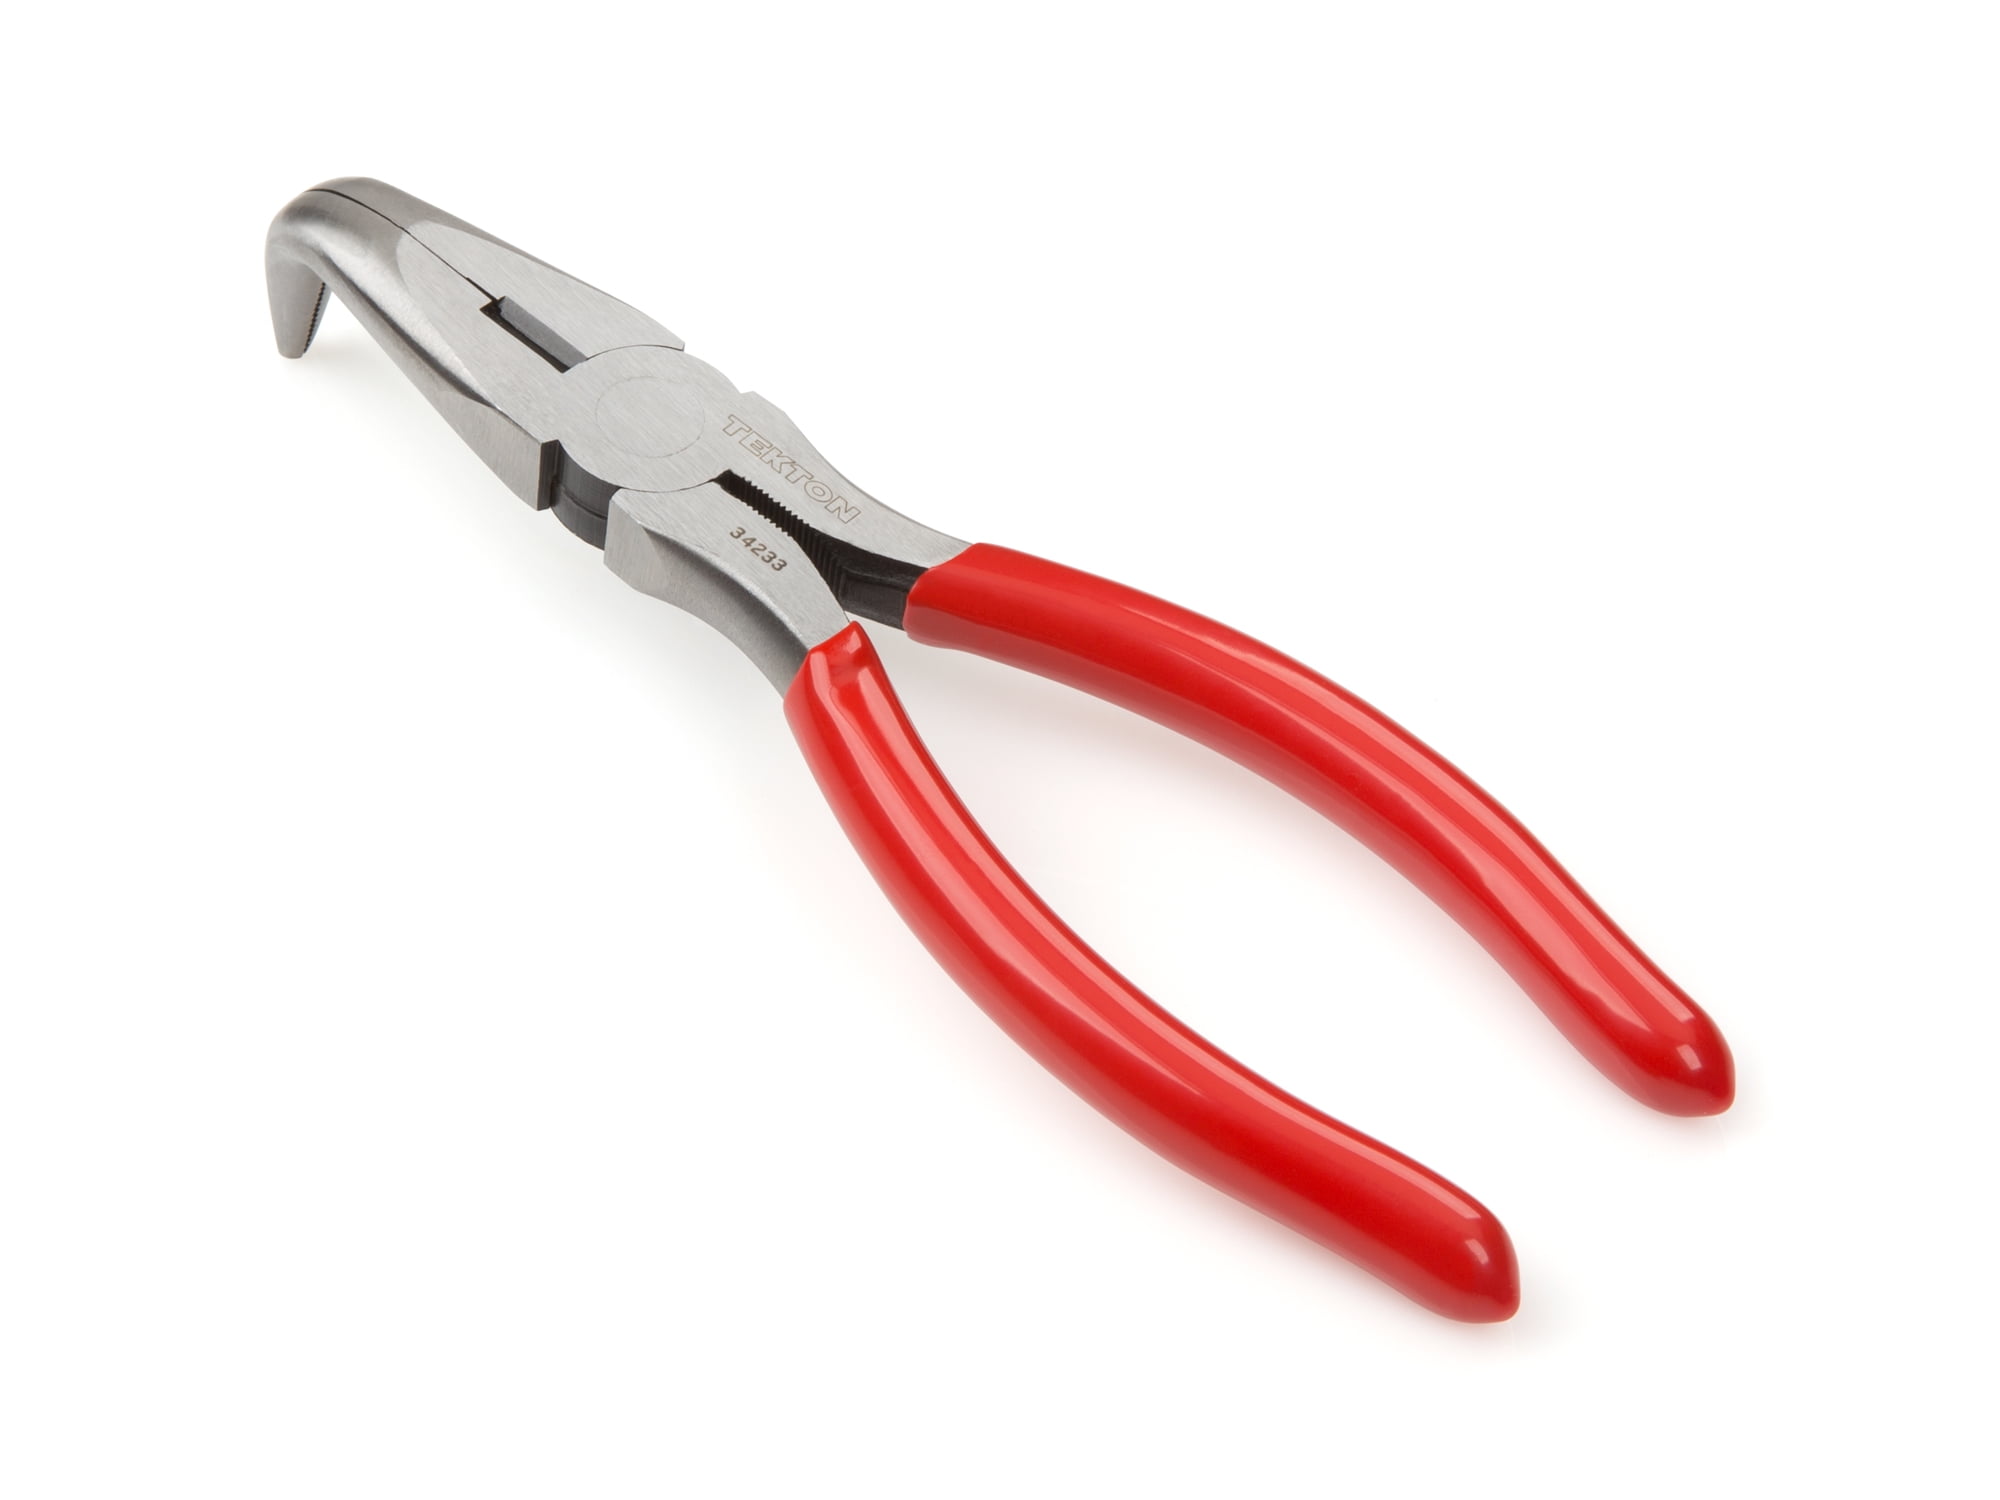 5-1/2 Flat/Long Nose Pliers Made in Germany, PLR-307.00